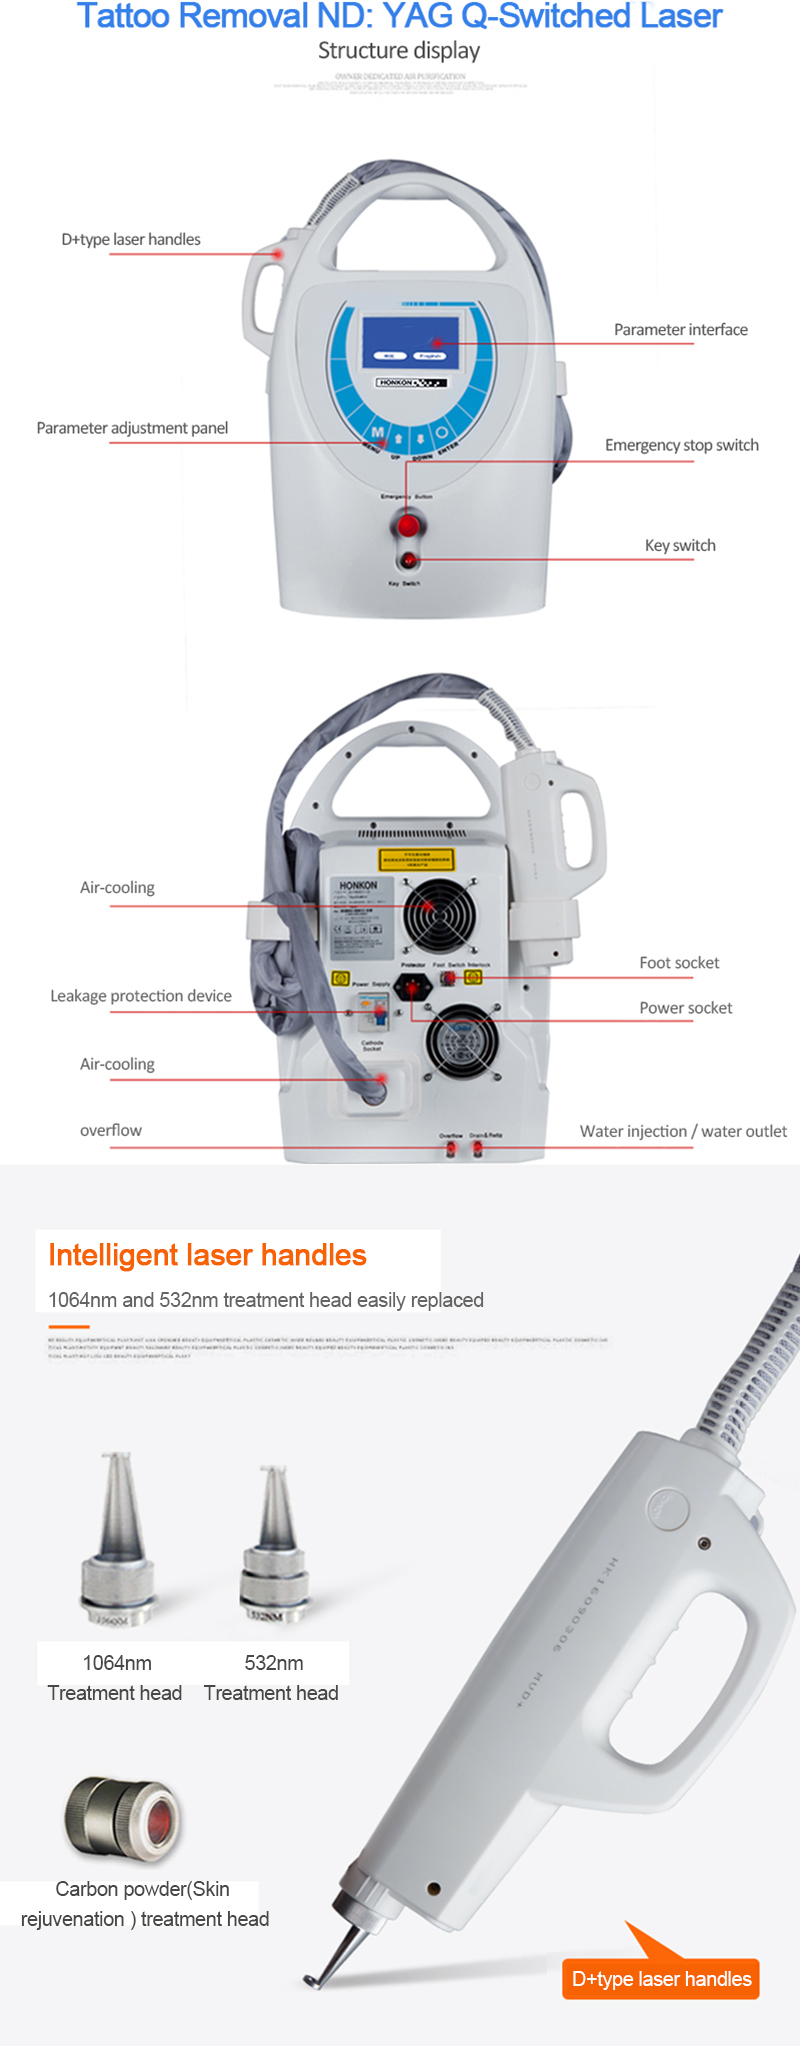 1064nm Q-Switched ND:YAG Laser, Laser Tattoo Removal Machine, Pigment Lesions Removal Machine, MV11